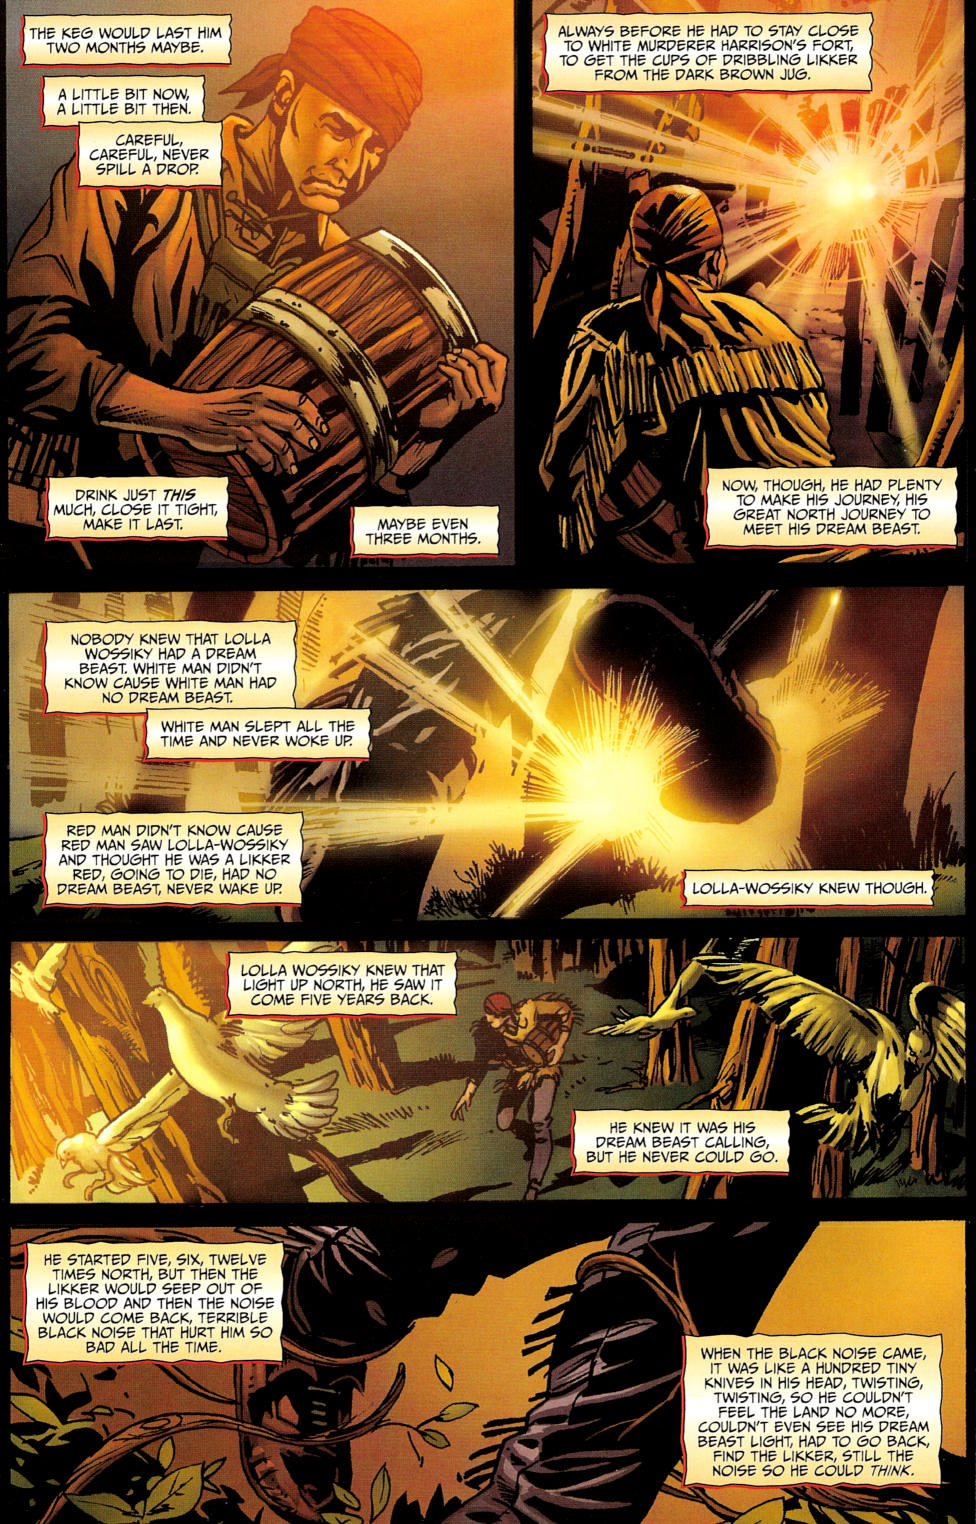 Red Prophet: The Tales of Alvin Maker issue 2 - Page 8